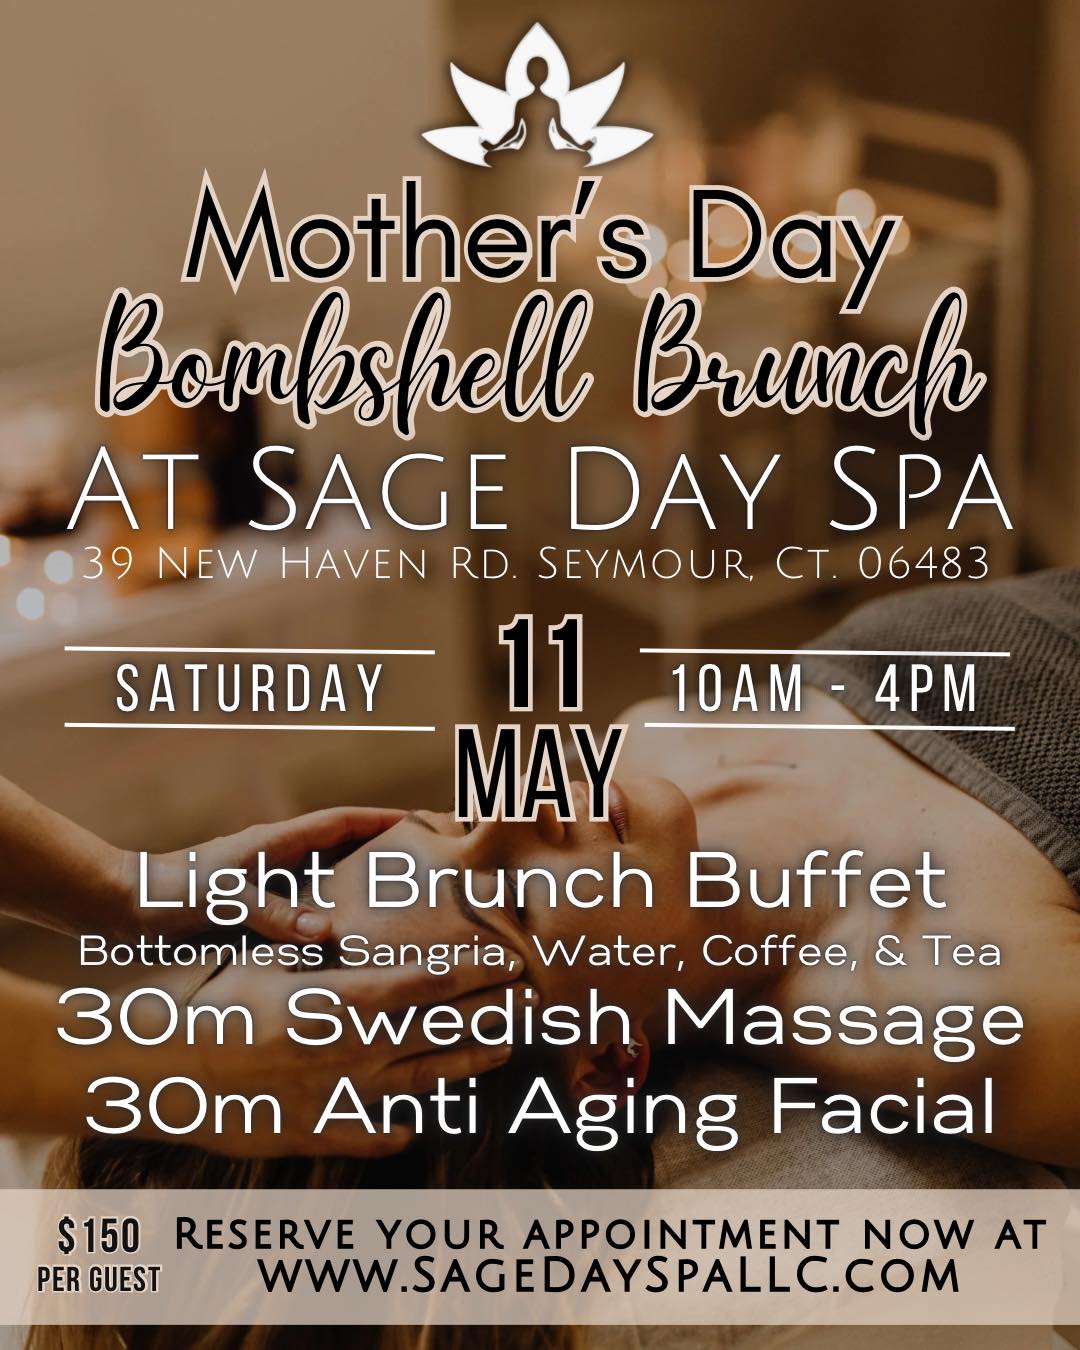 Sage Day Spa LLC 39 New Haven Rd Suite 4, Seymour Connecticut 06483